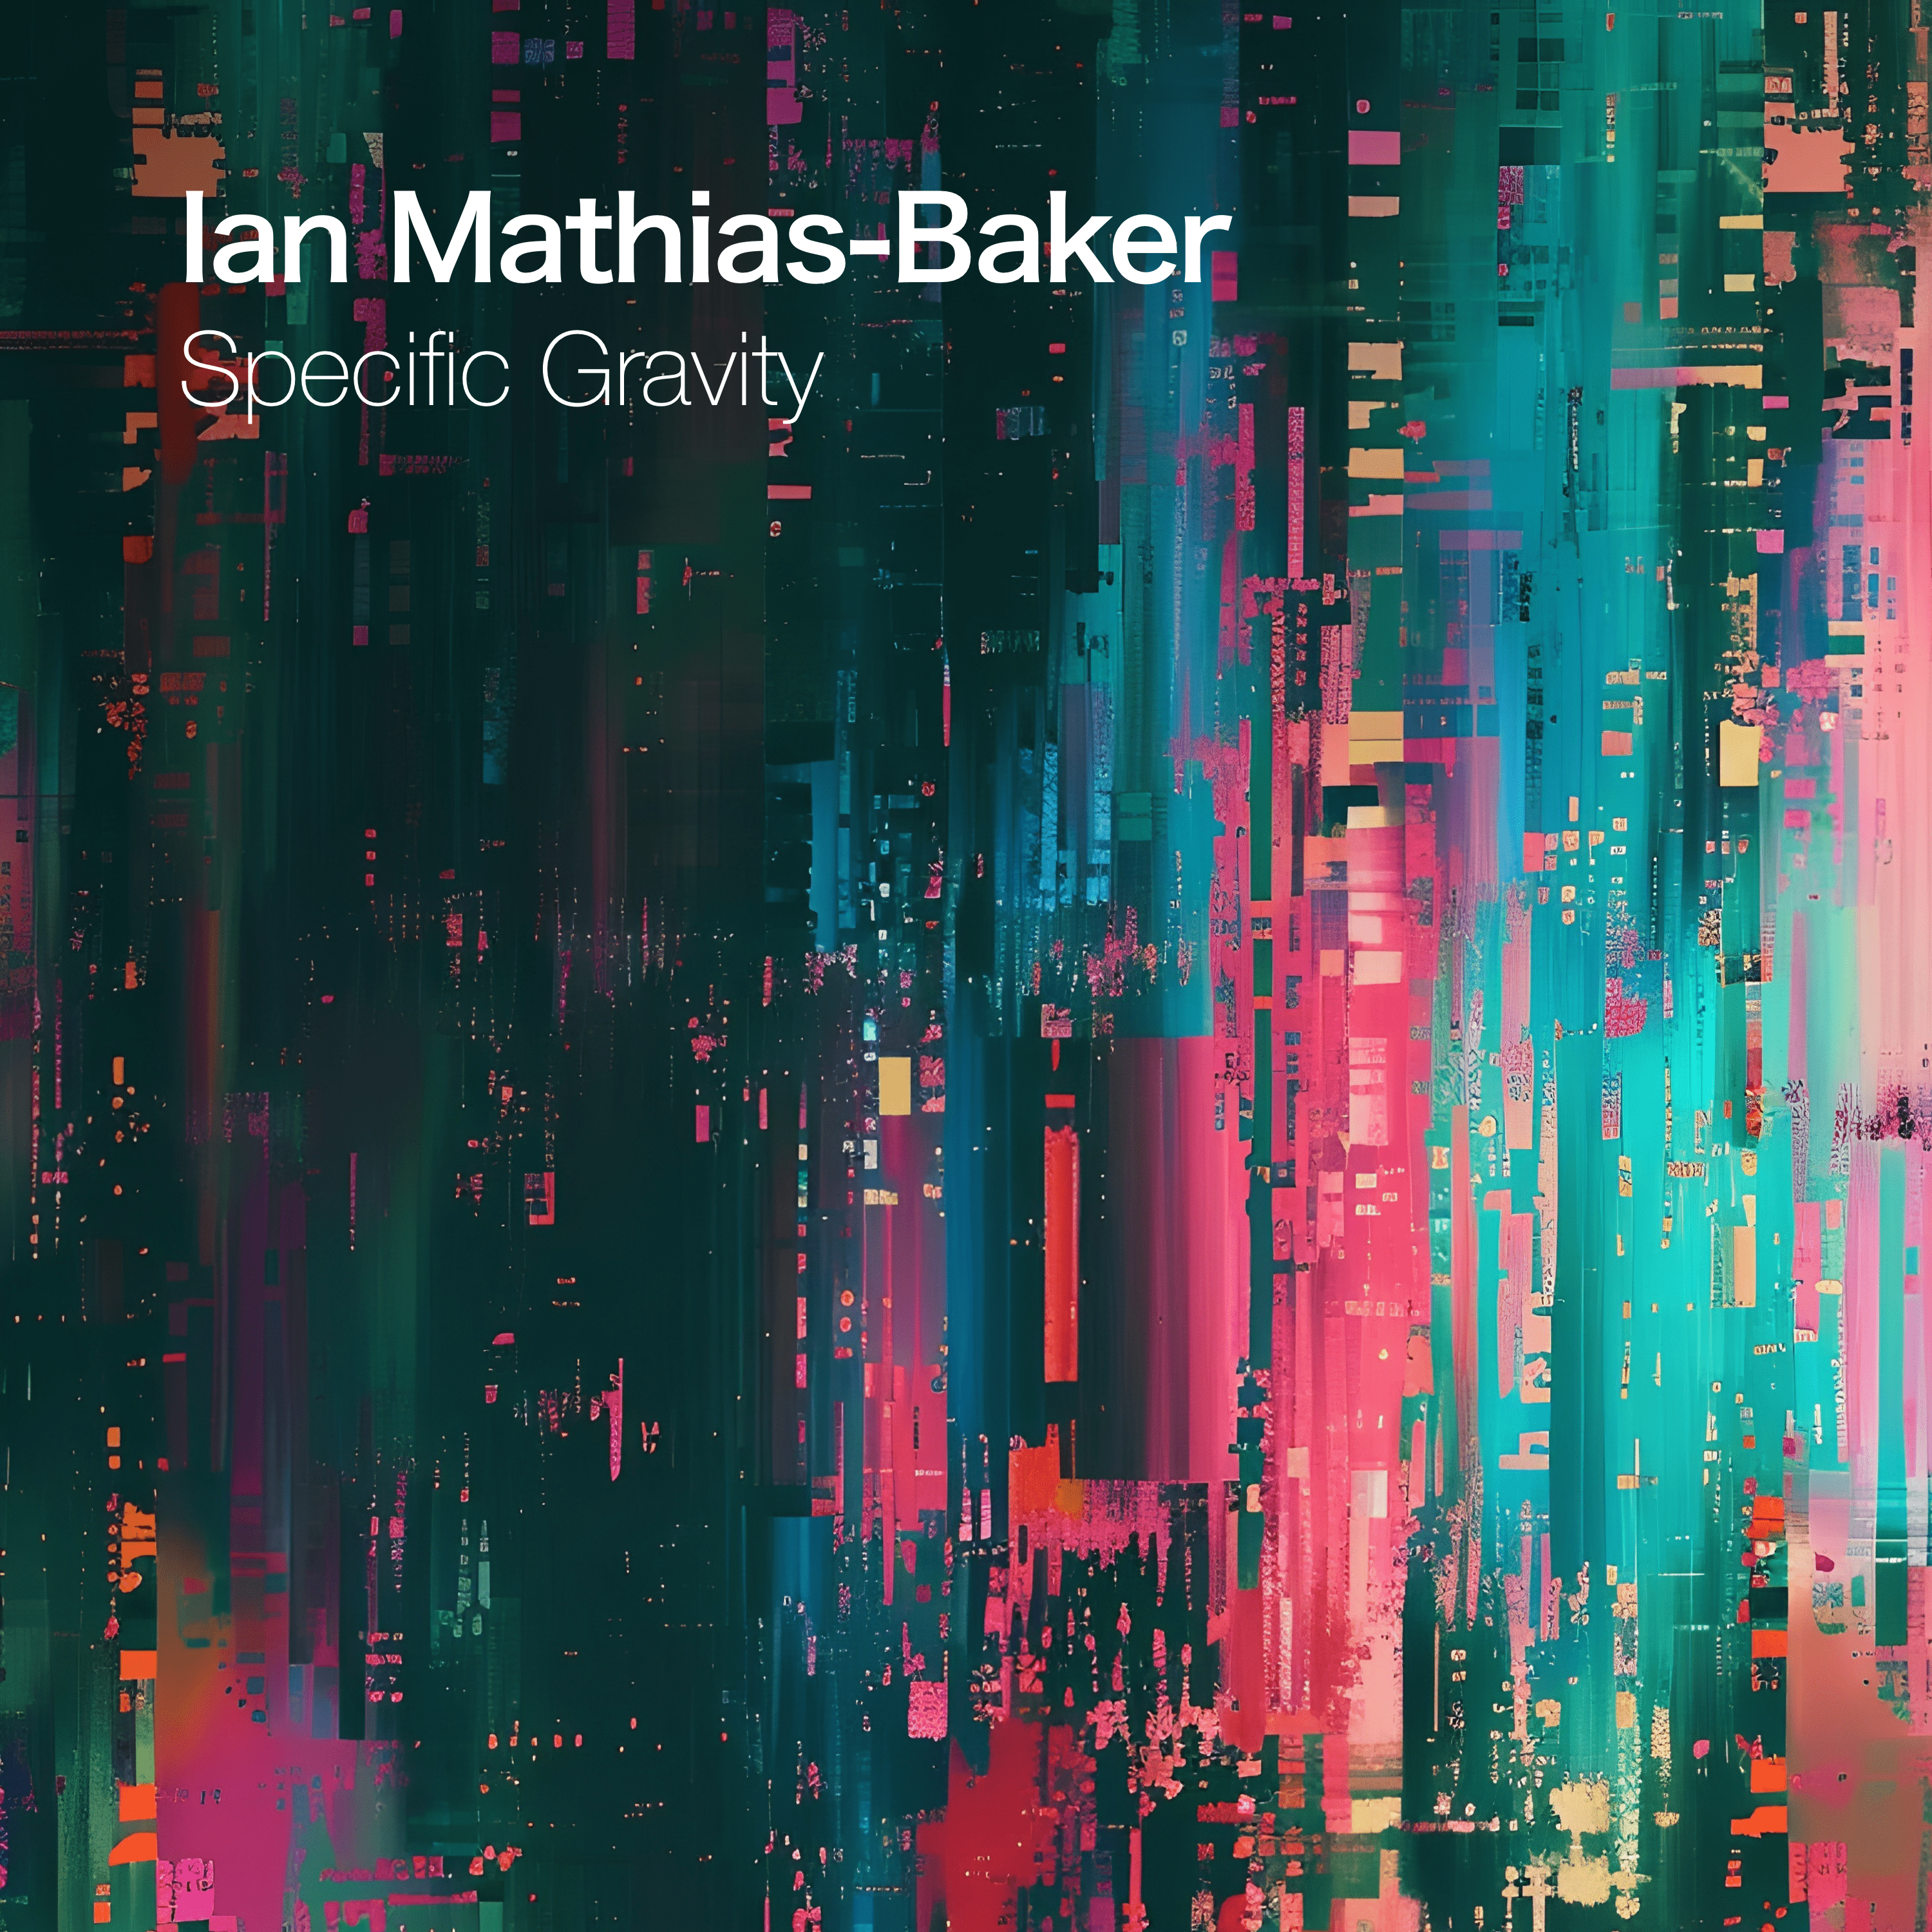 Ian Mathias-Baker’s ‘Specific Gravity’: A Symphony of Melancholy and Reflection